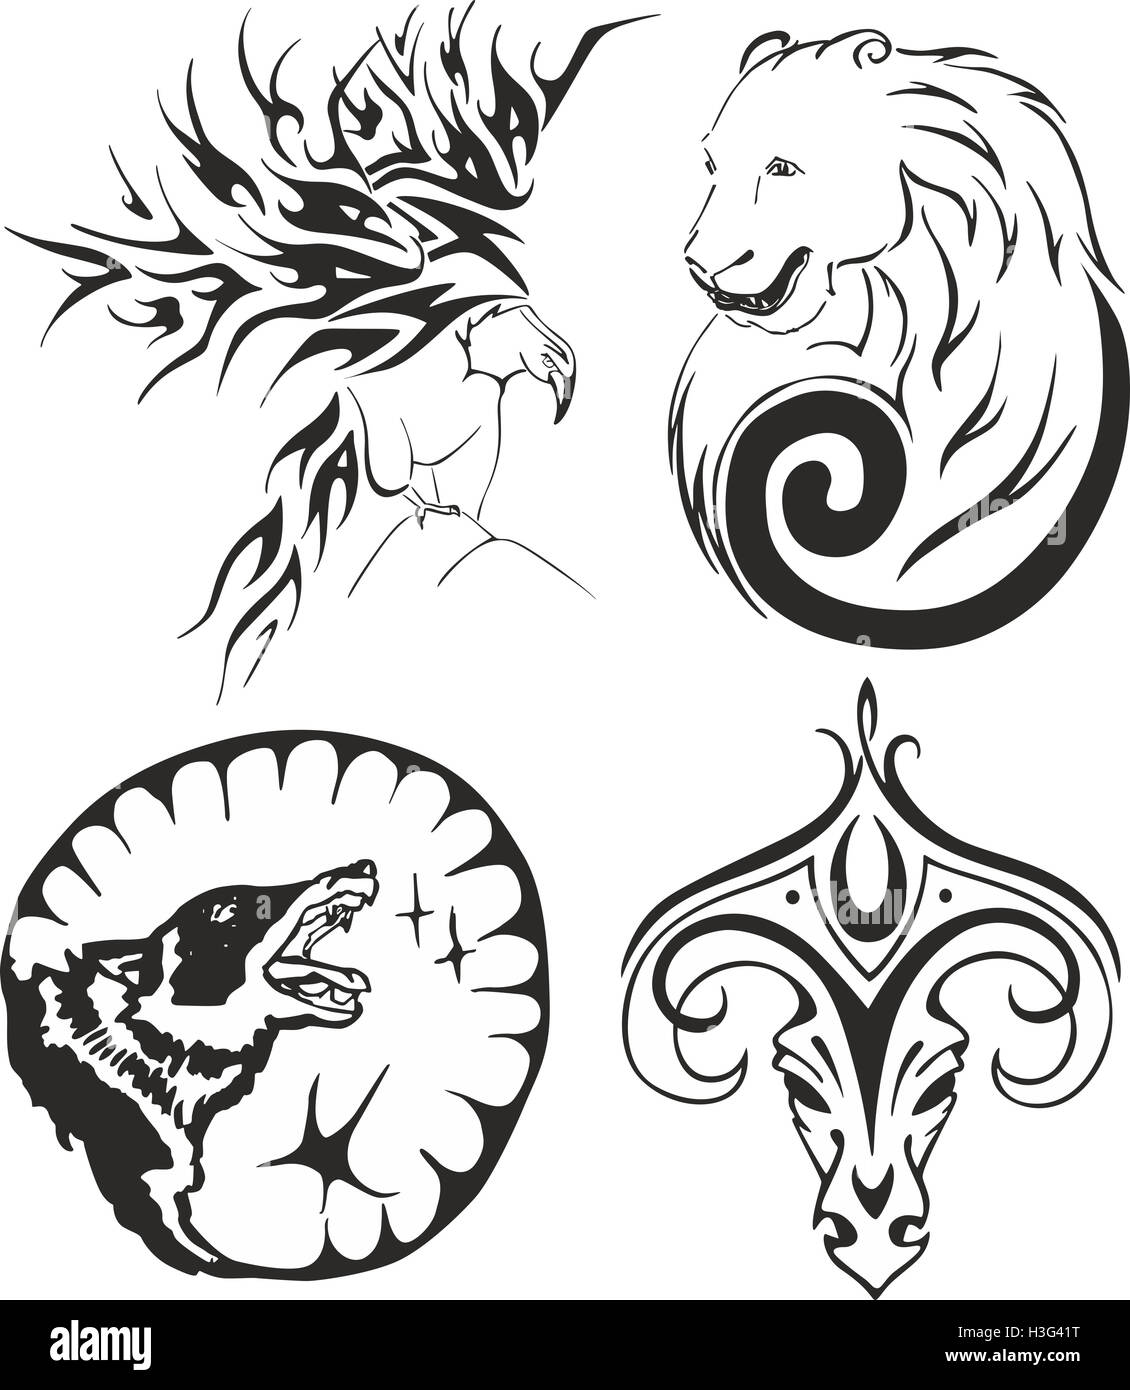 Black and white tribal tattoo set with an eagle, a bear, a wolf and a ram. Animal tattoo sketches. Stock Photo